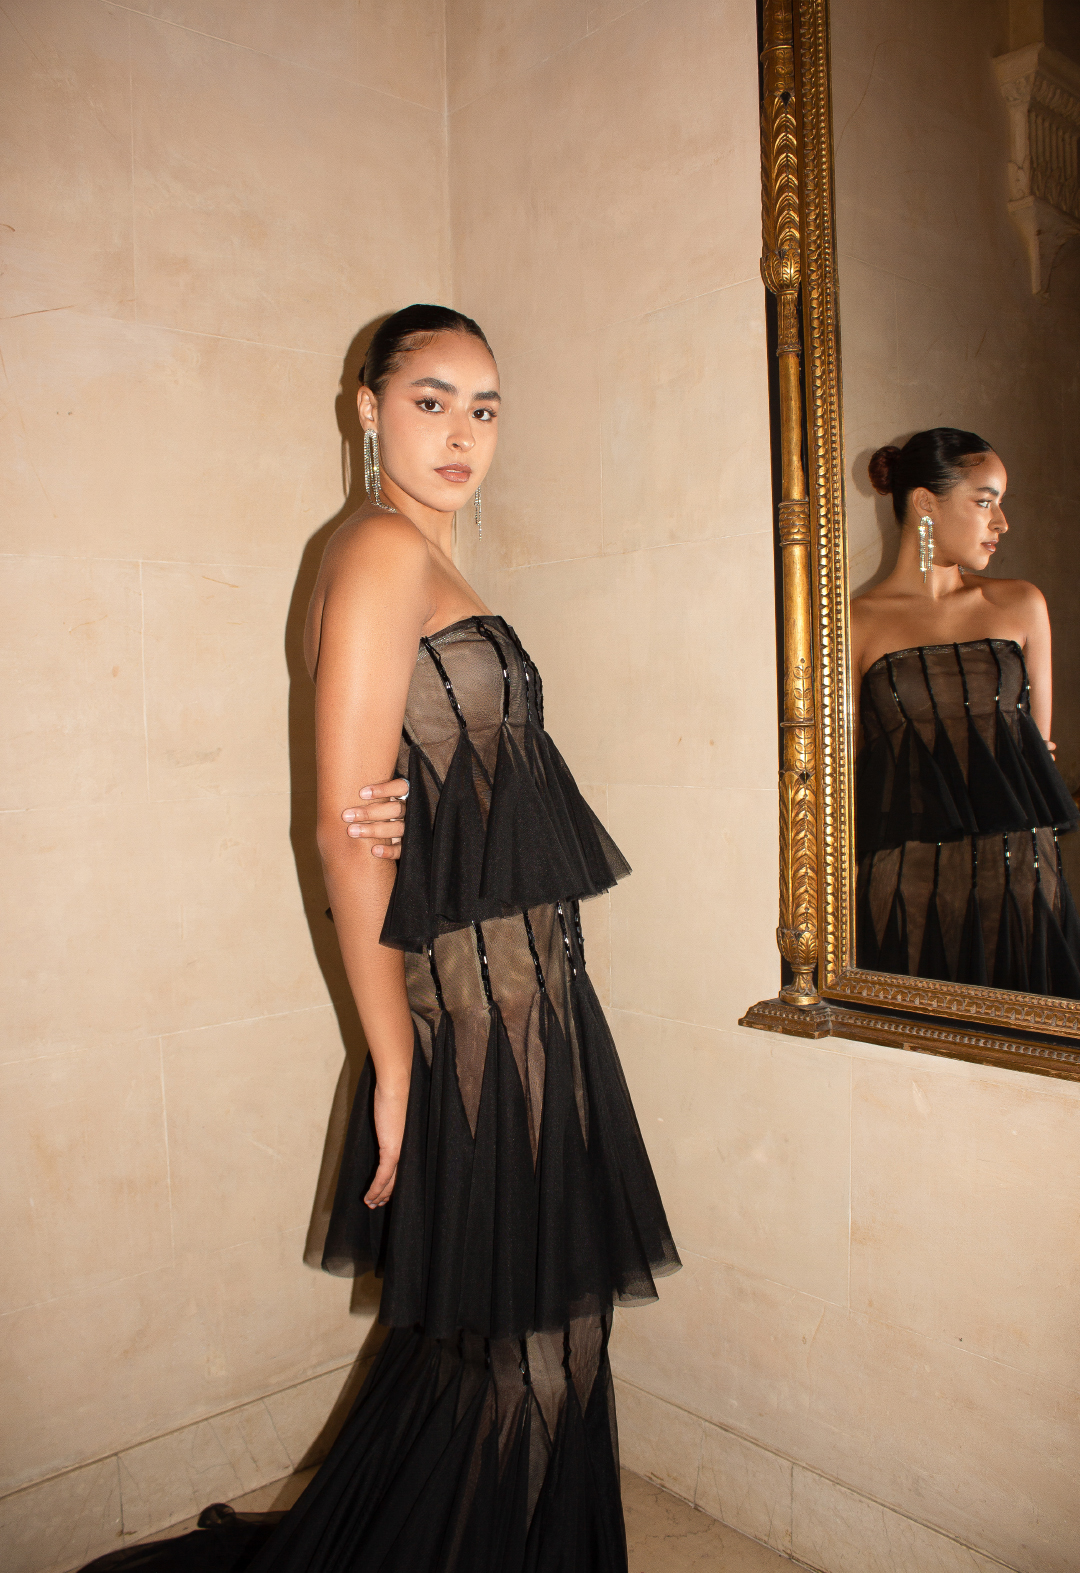 This is the side view of the embellished black mesh gown. In the image, the model is standing in front of a gold-framed mirror and looking into the camera. Her image is reflected in the mirror. The image is giving a very royal vibe. The look is complemented by a pair of long rhinestone earrings.